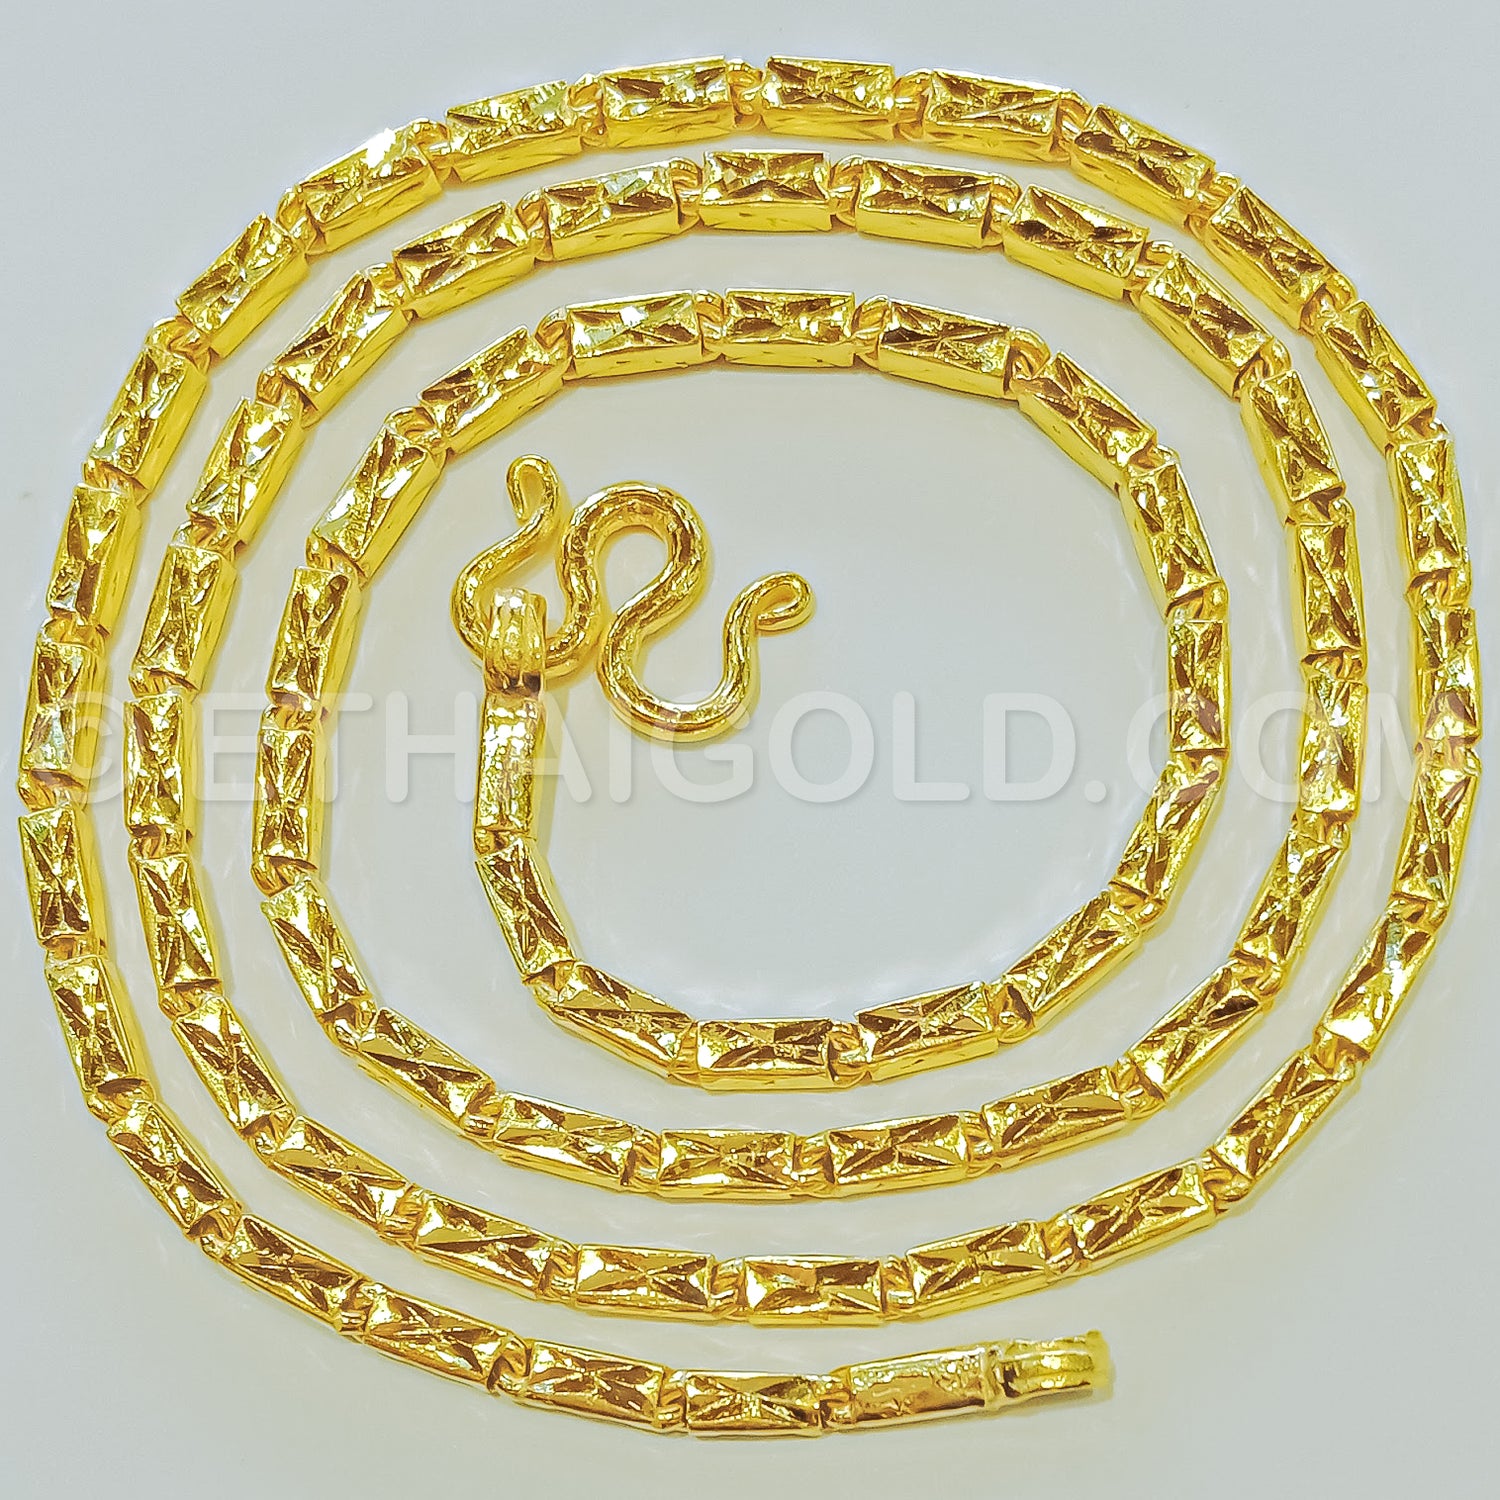 2 Baht Gold Chains